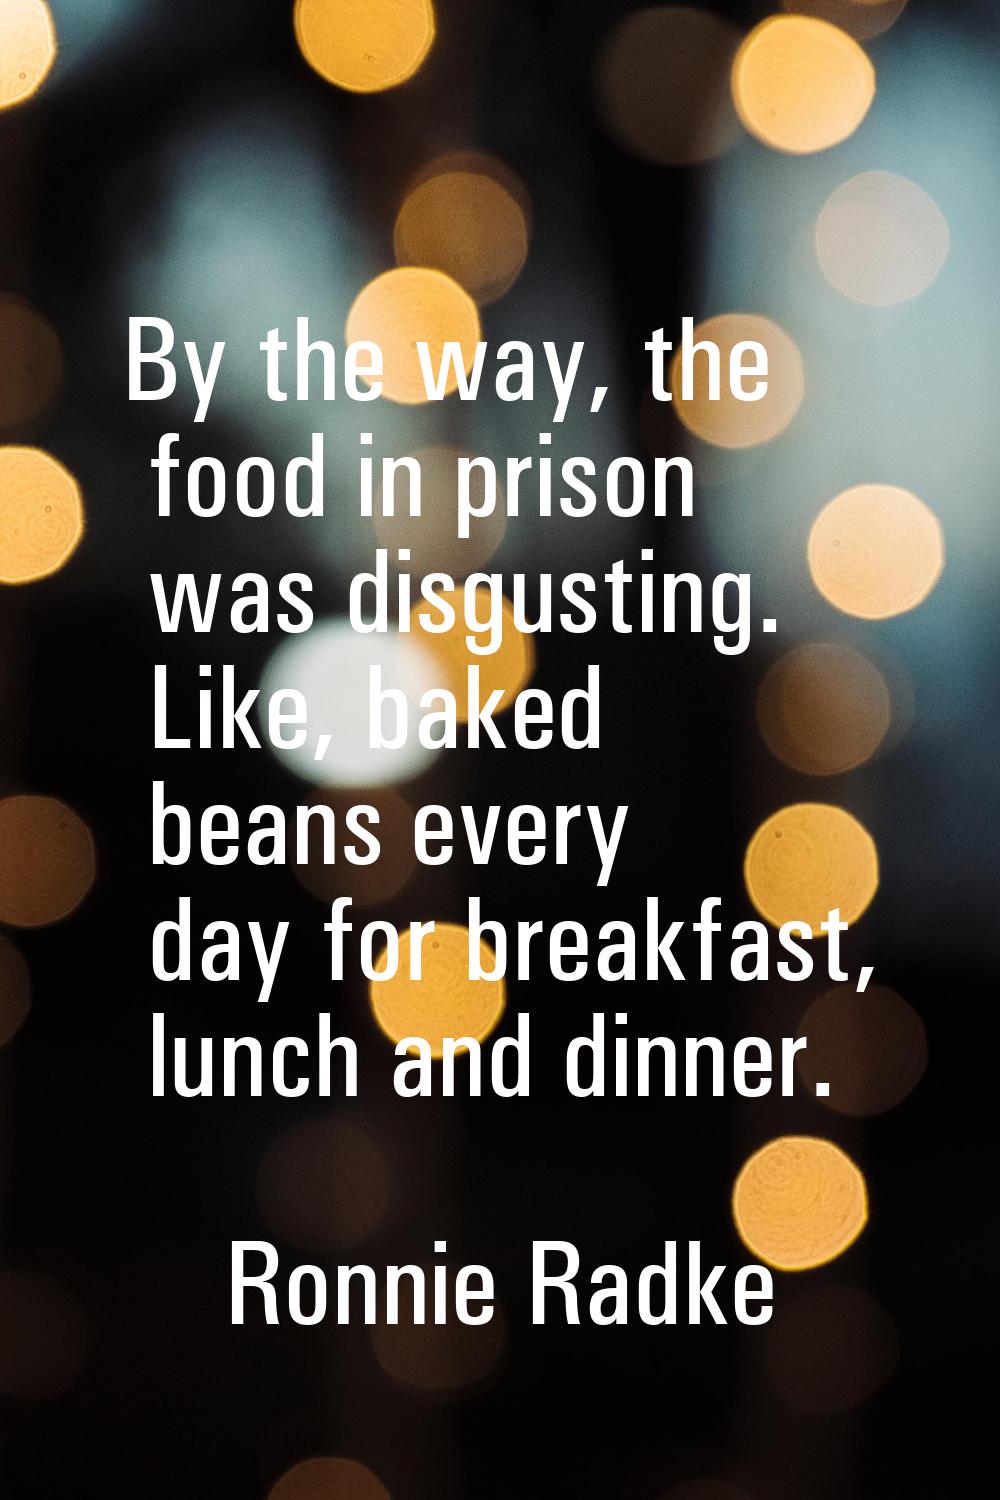 By the way, the food in prison was disgusting. Like, baked beans every day for breakfast, lunch and